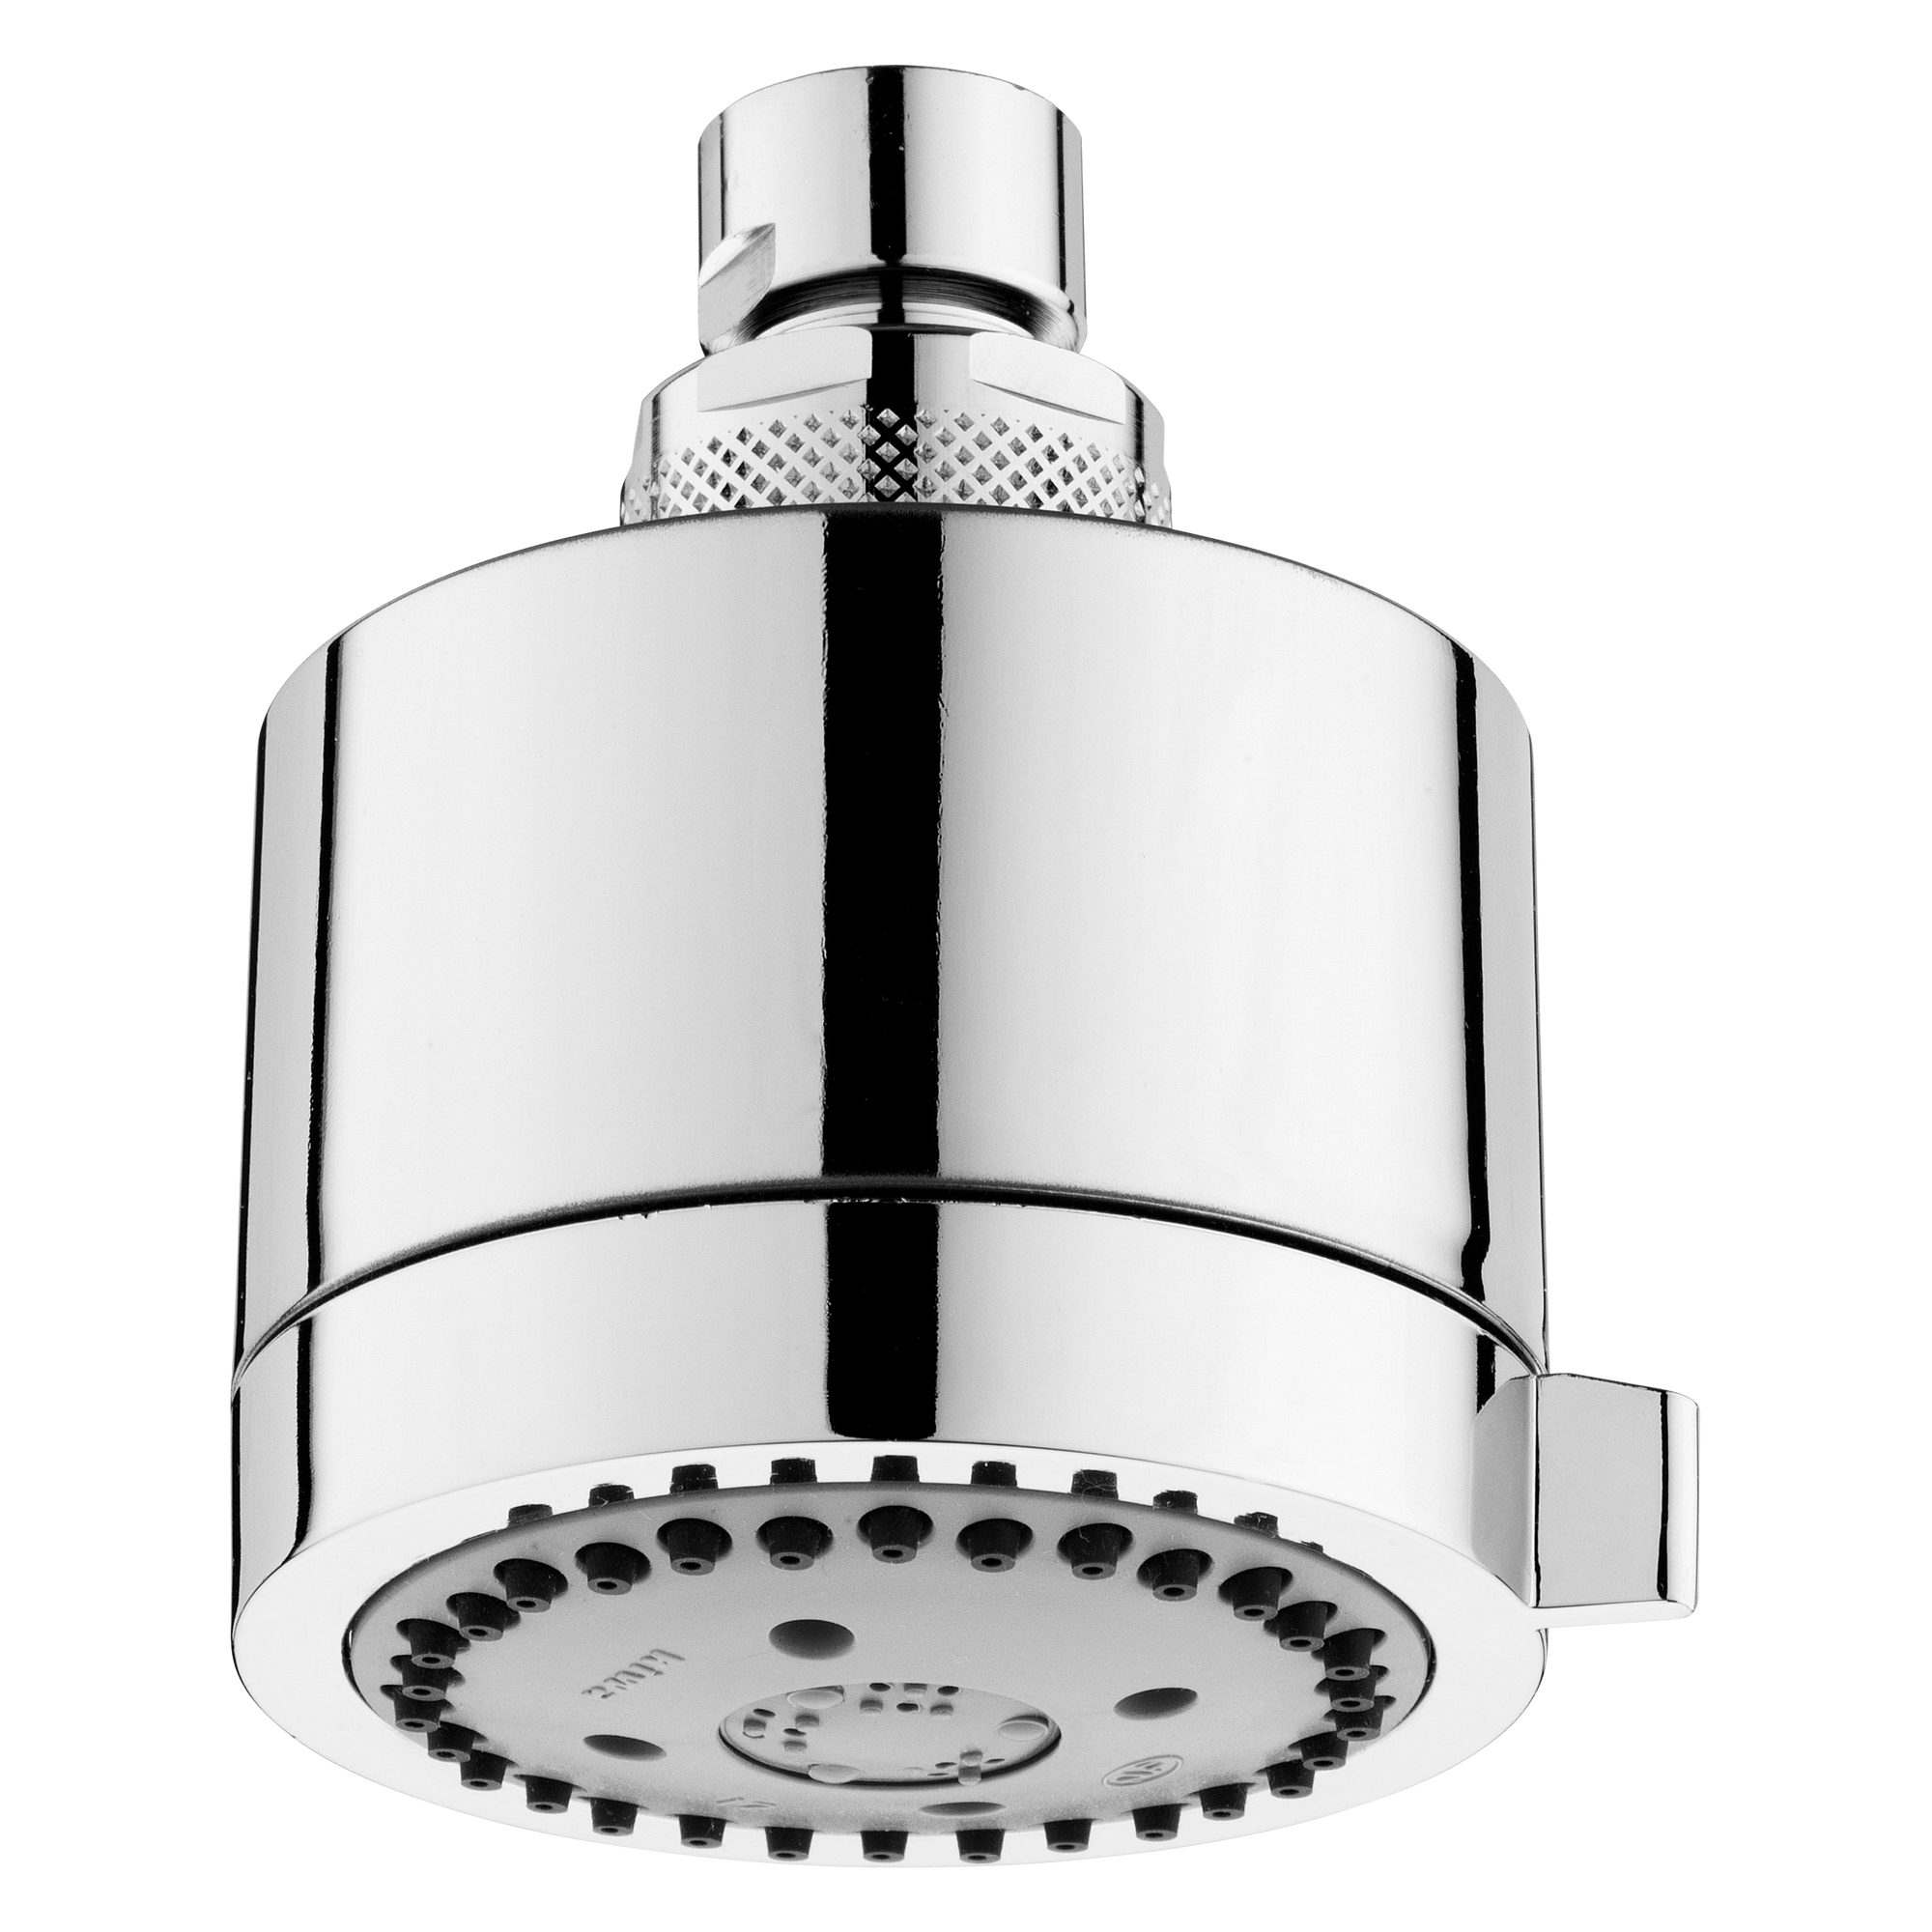 A sleek and contemporary showerhead that will complement any bathroom.